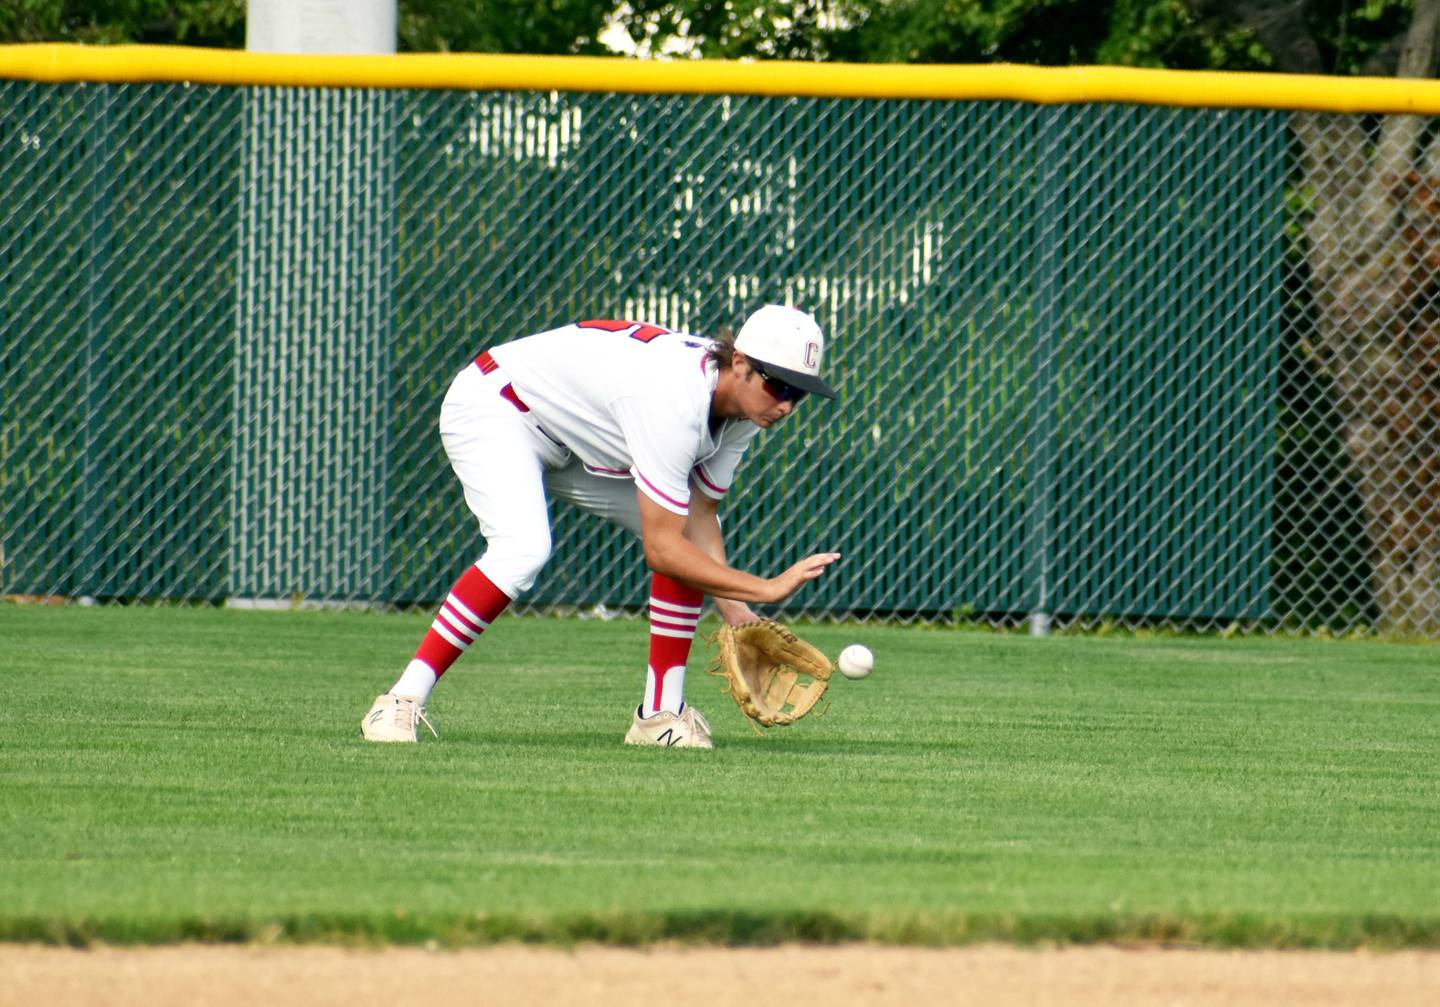 Senior centerfielder McCoy Haines fields a ball in game two.